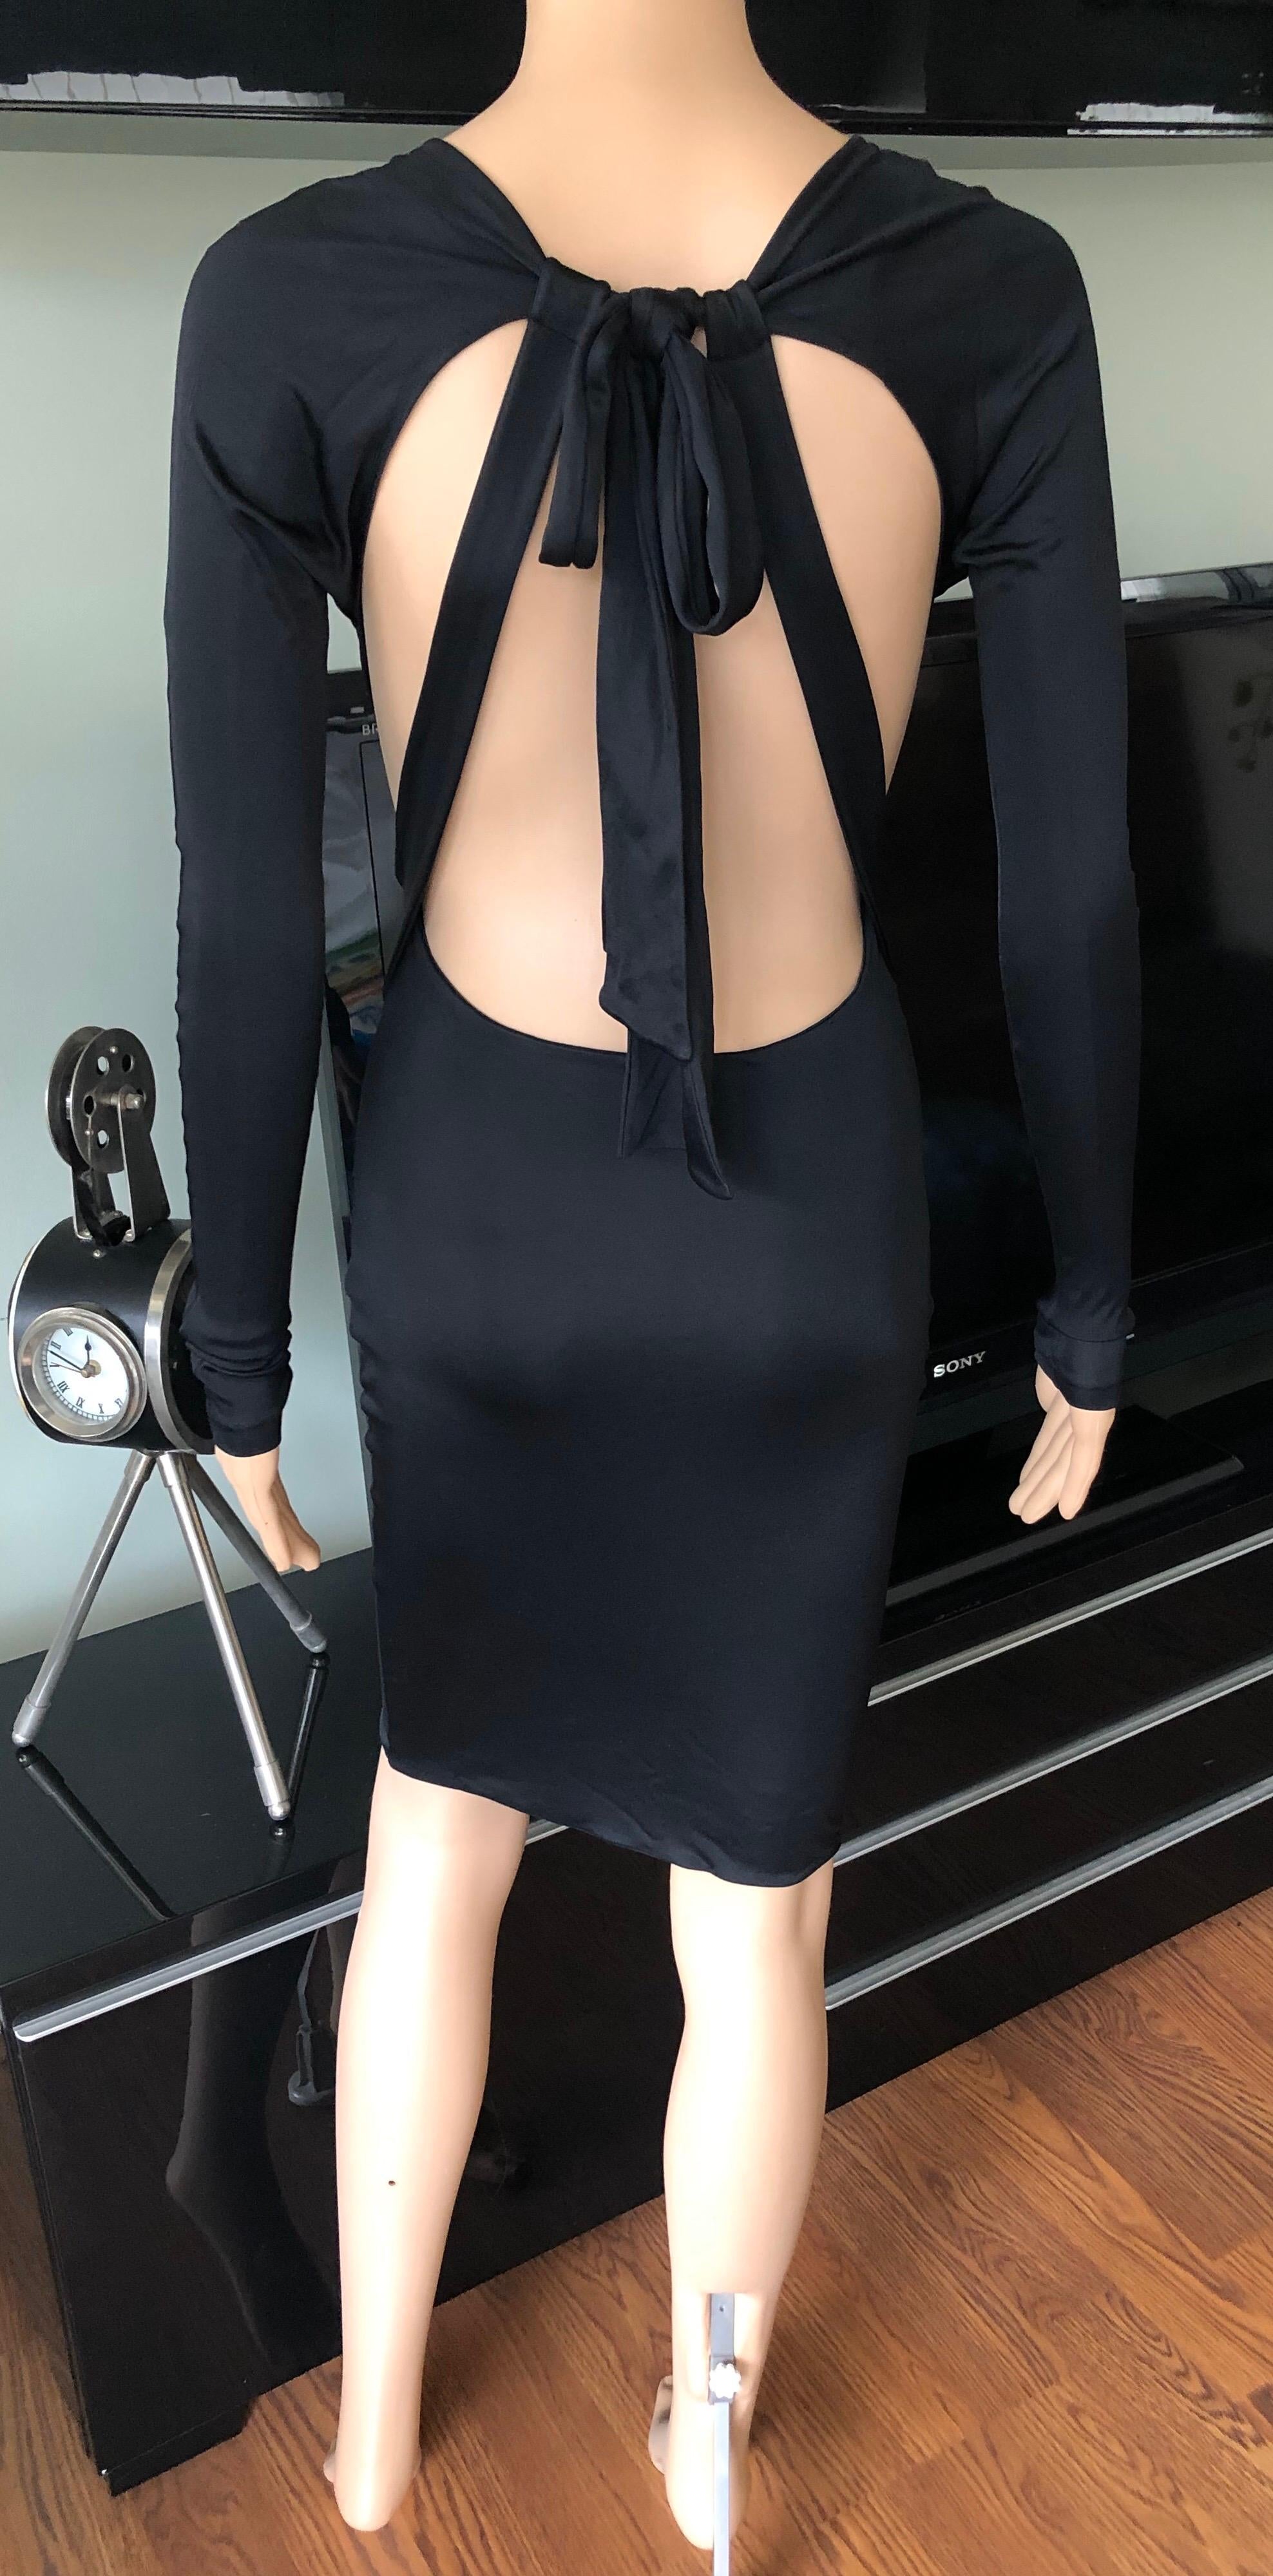 Women's or Men's Gucci S/S 2005 Tom Ford Plunging Cutout Backless Bodycon Black Dress For Sale